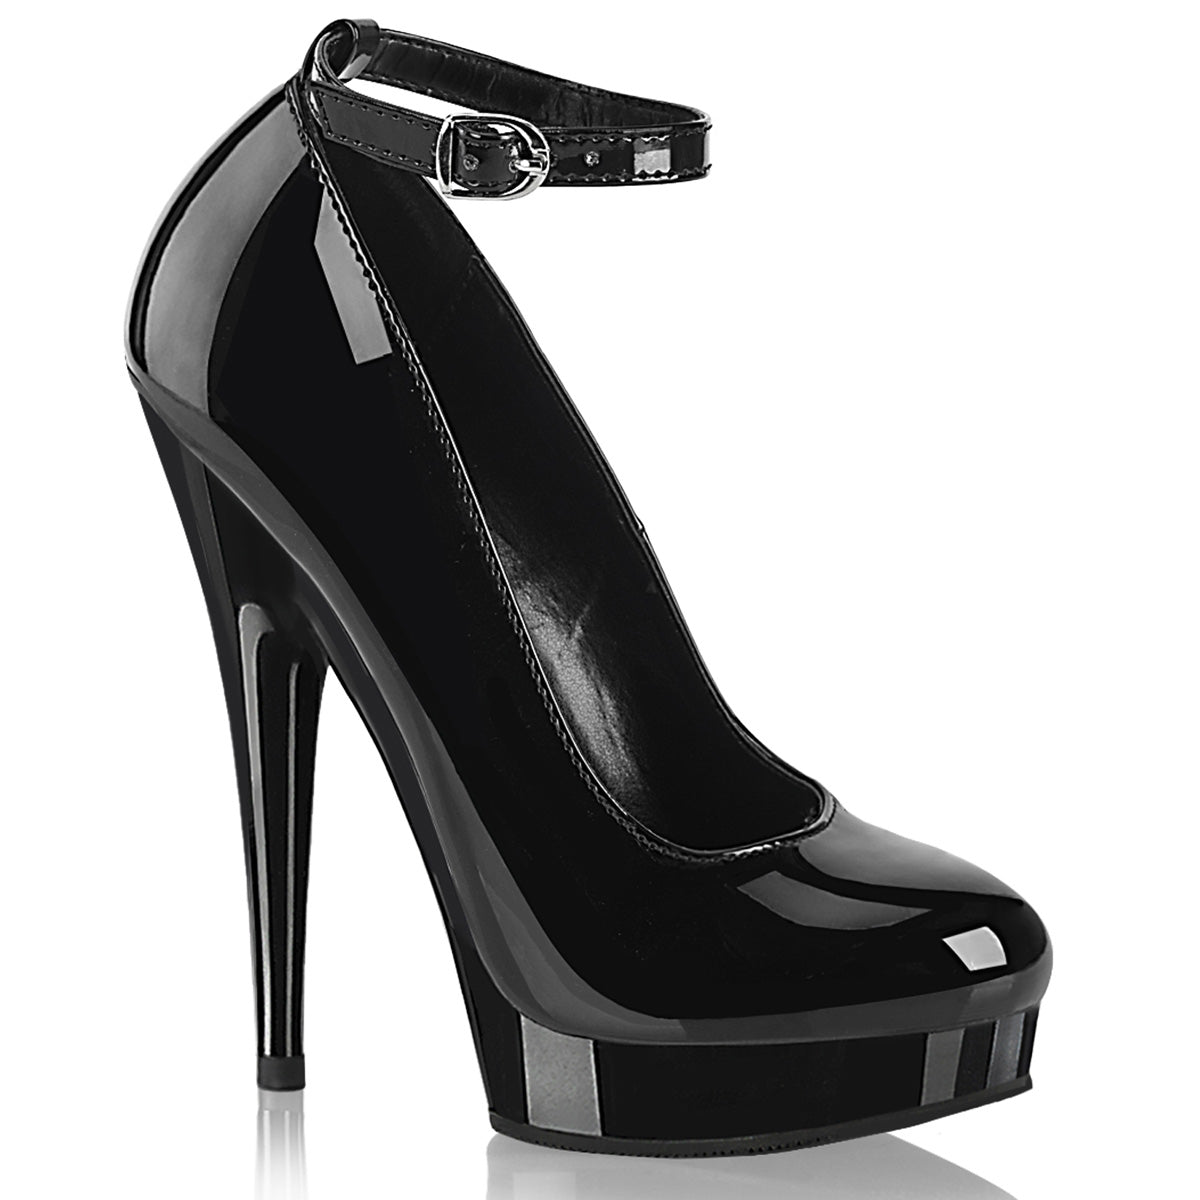 SULTRY-686 Blk Pat/Blk